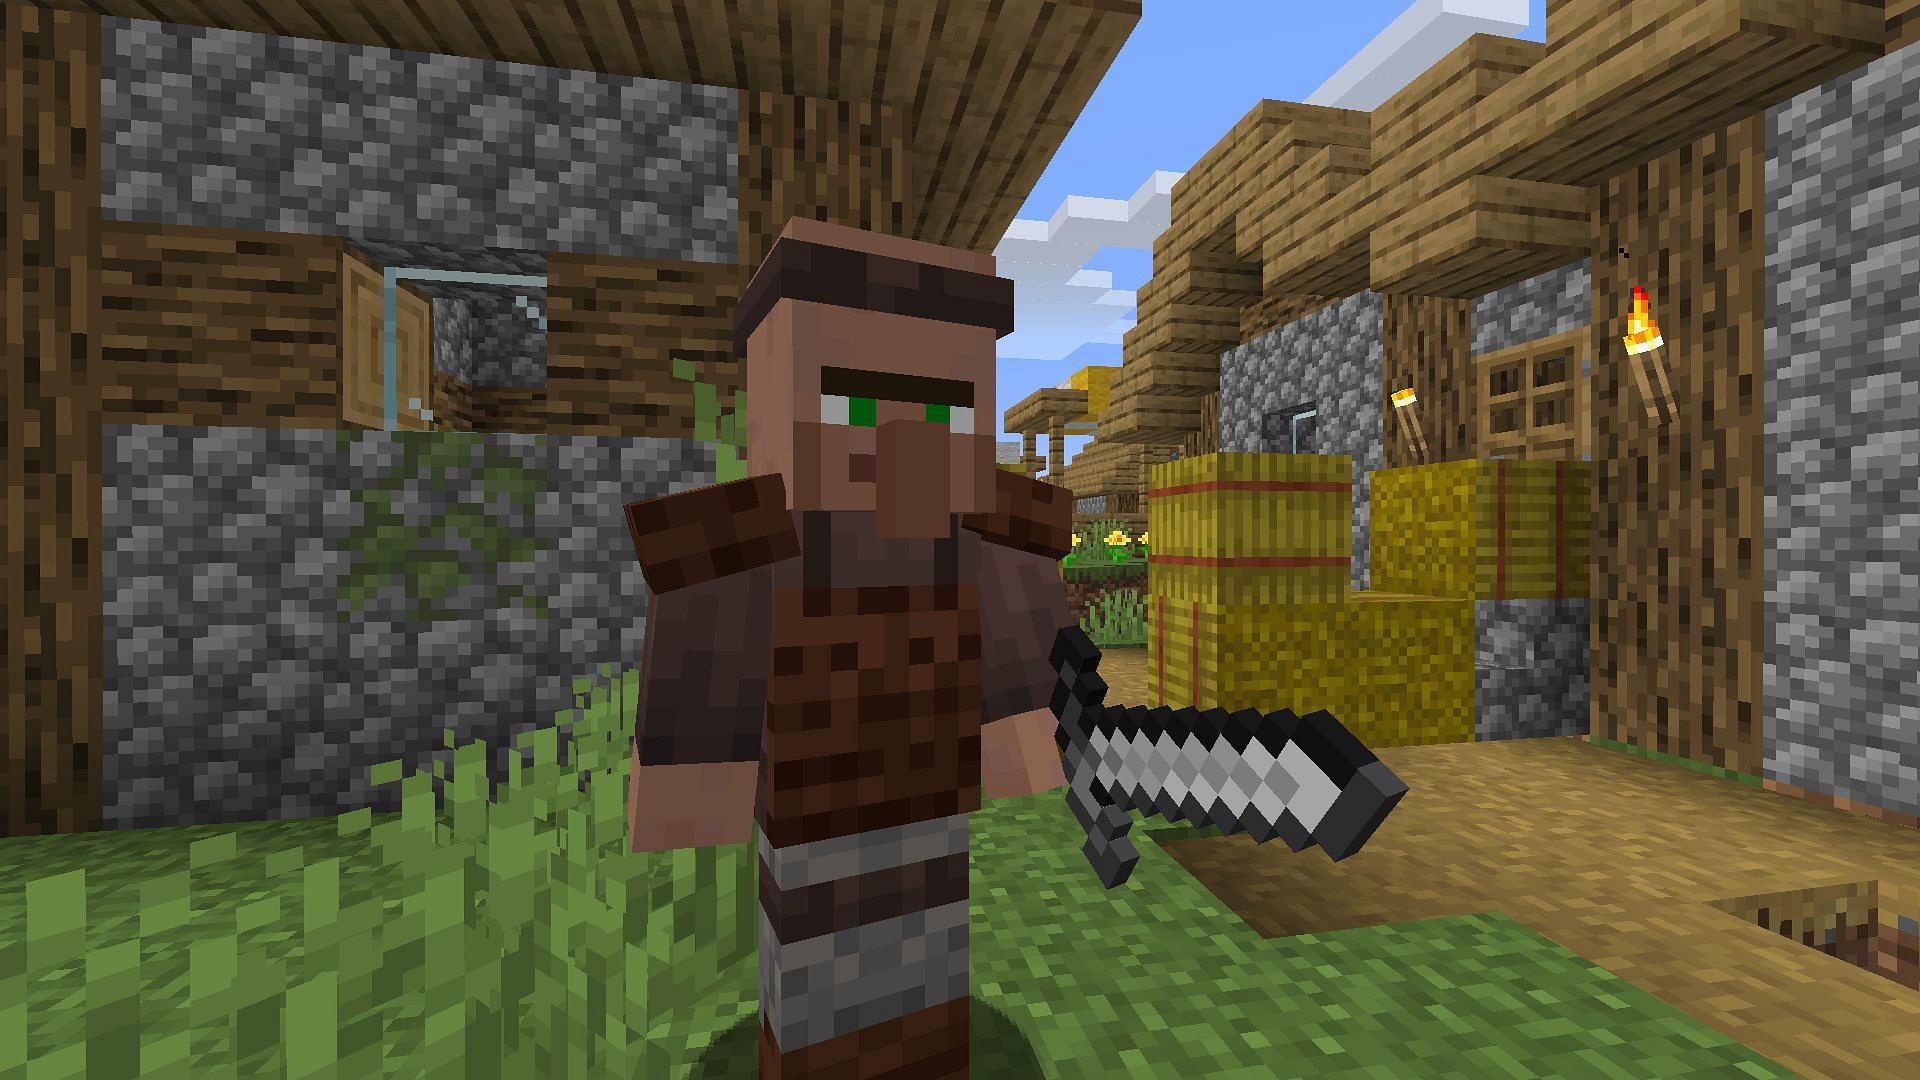 More Villagers - Minecraft Mods - CurseForge